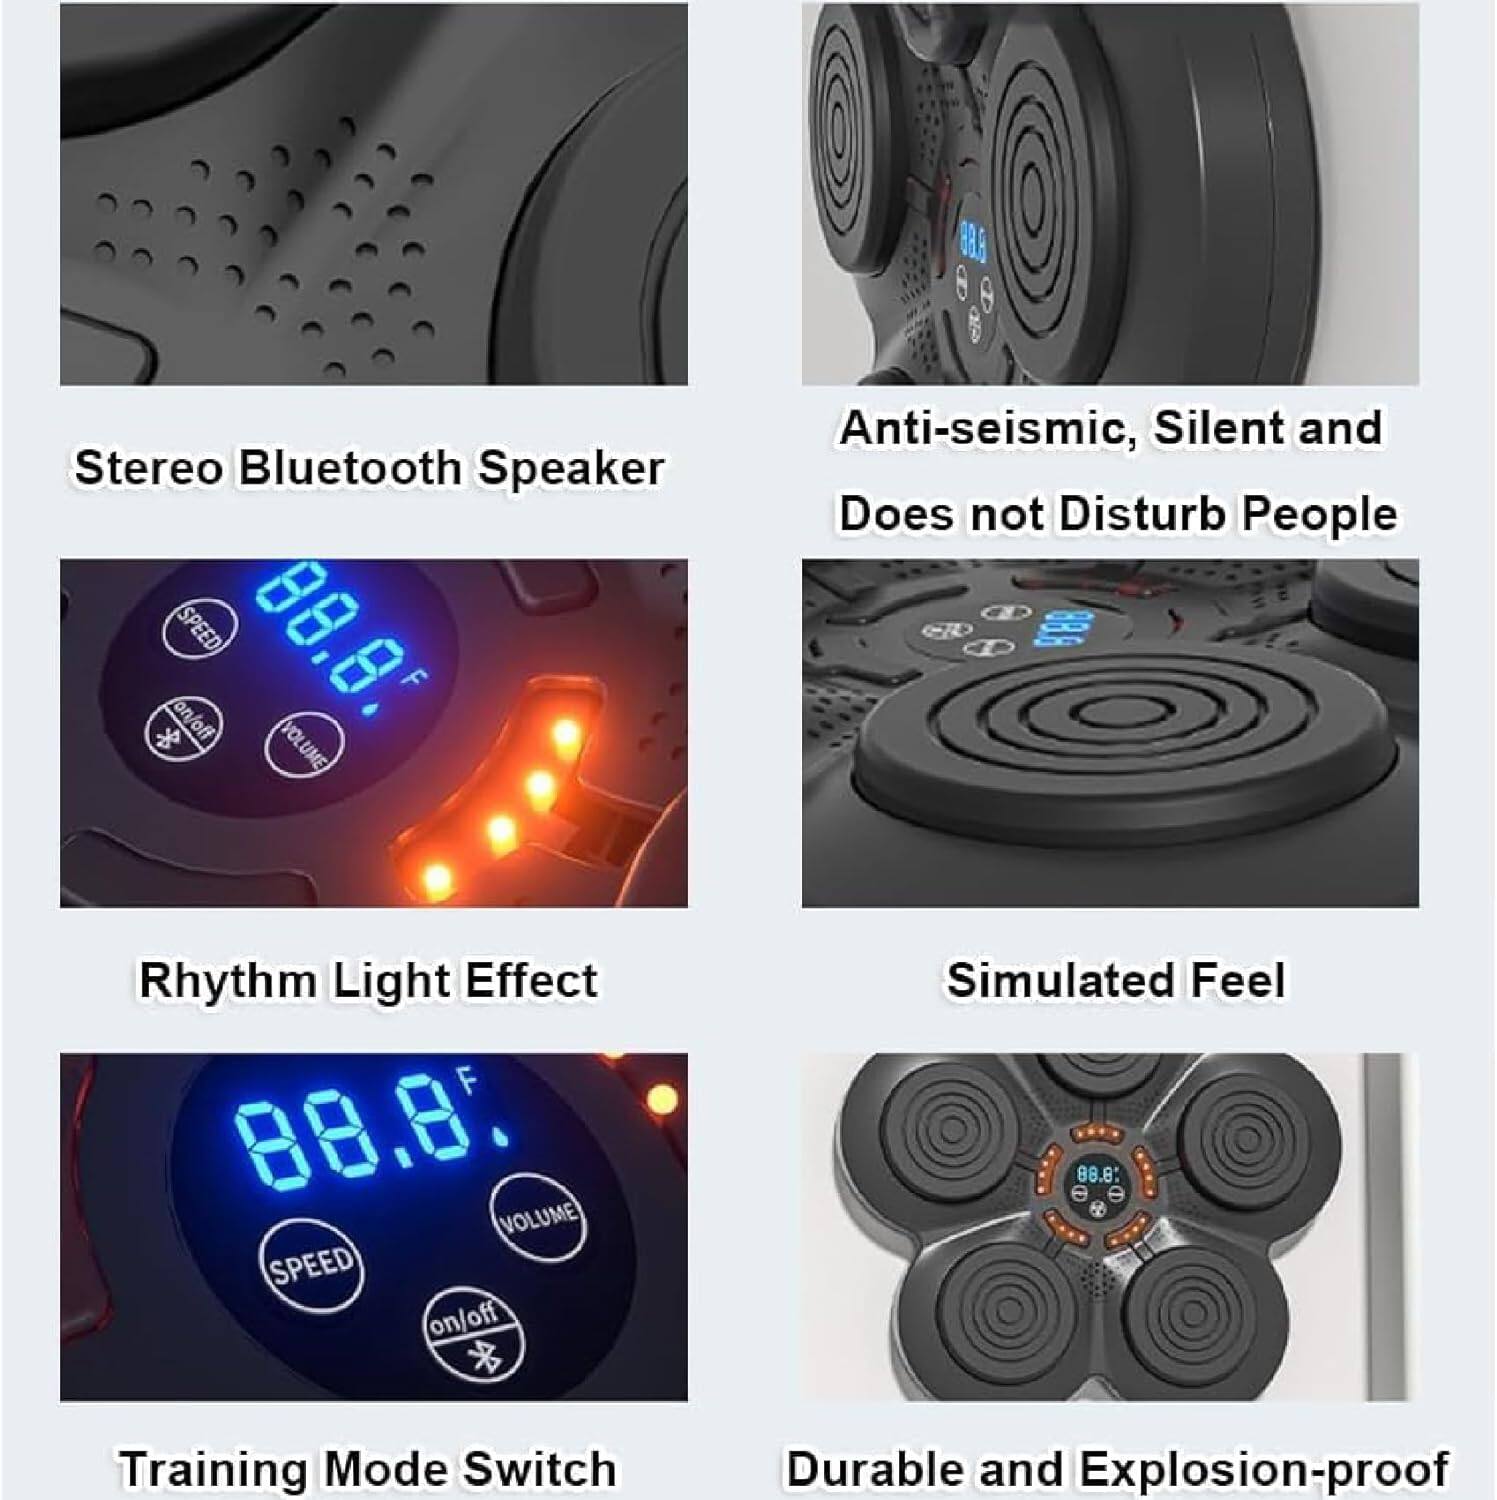 Electronic Music Boxing Machine, Wall Mounted Smart Boxing Game with Gloves, Can Connect to Bluetooth, LED Lighting Target for Adults Children Exercise/Boxing Training